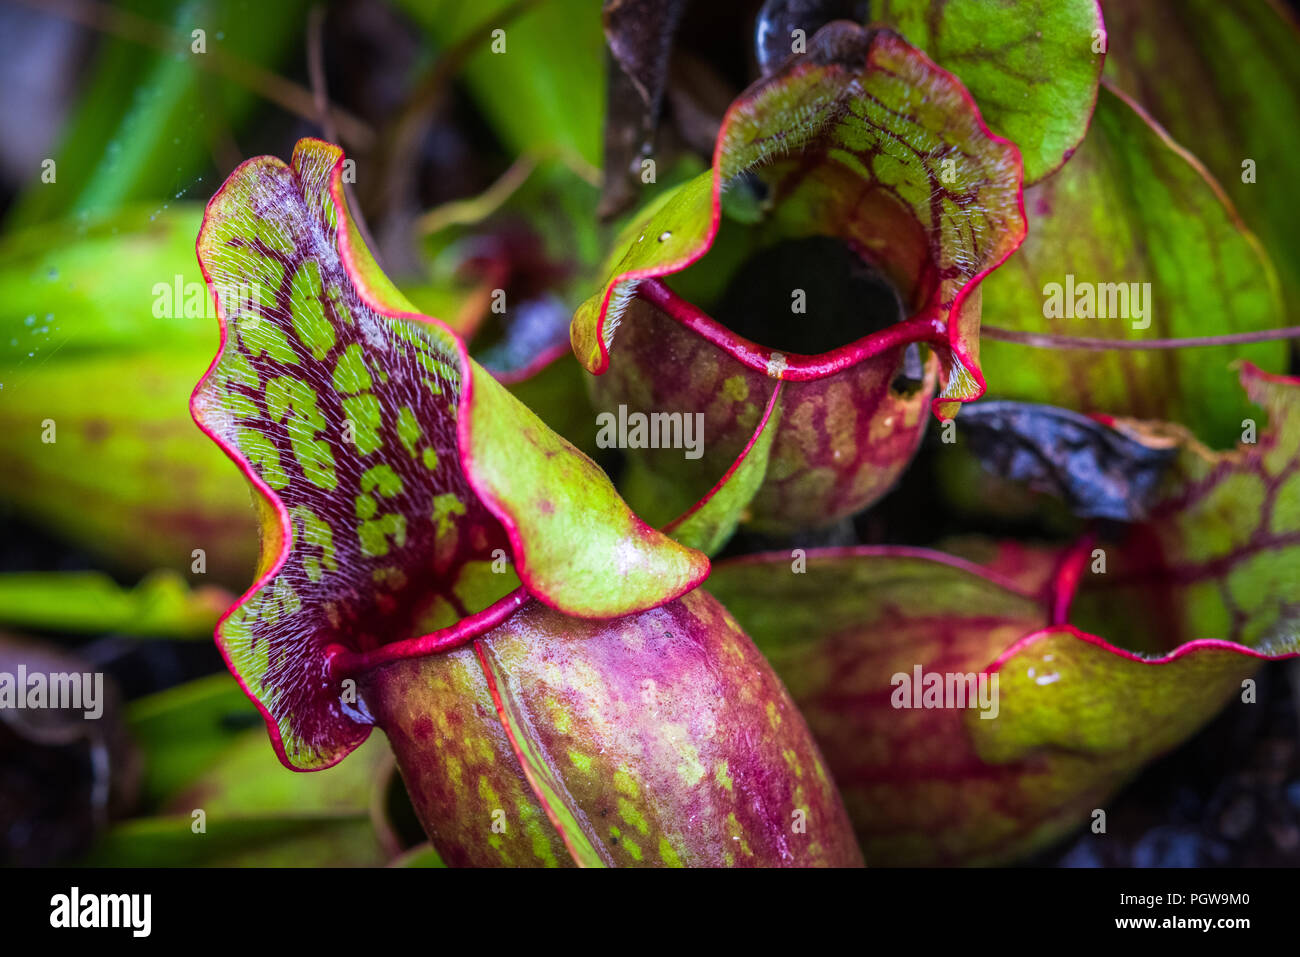 Close up of the carnivorous pitcher plants found in the bog of the Cranberry Glades area of West Virginia. Stock Photo